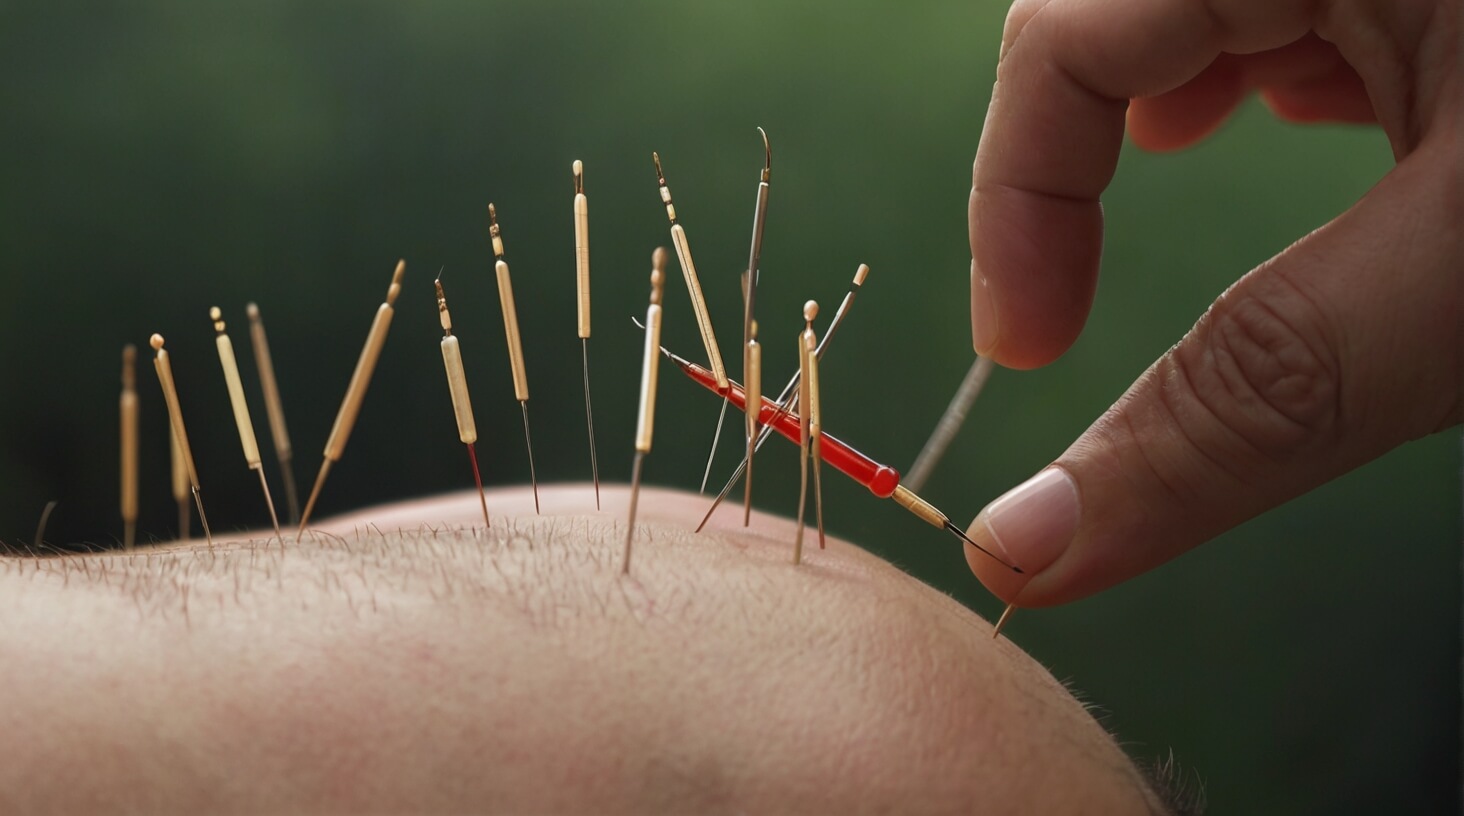 Acupuncture treatment being administered with focus and precision, emphasizing efficacy and wellness.